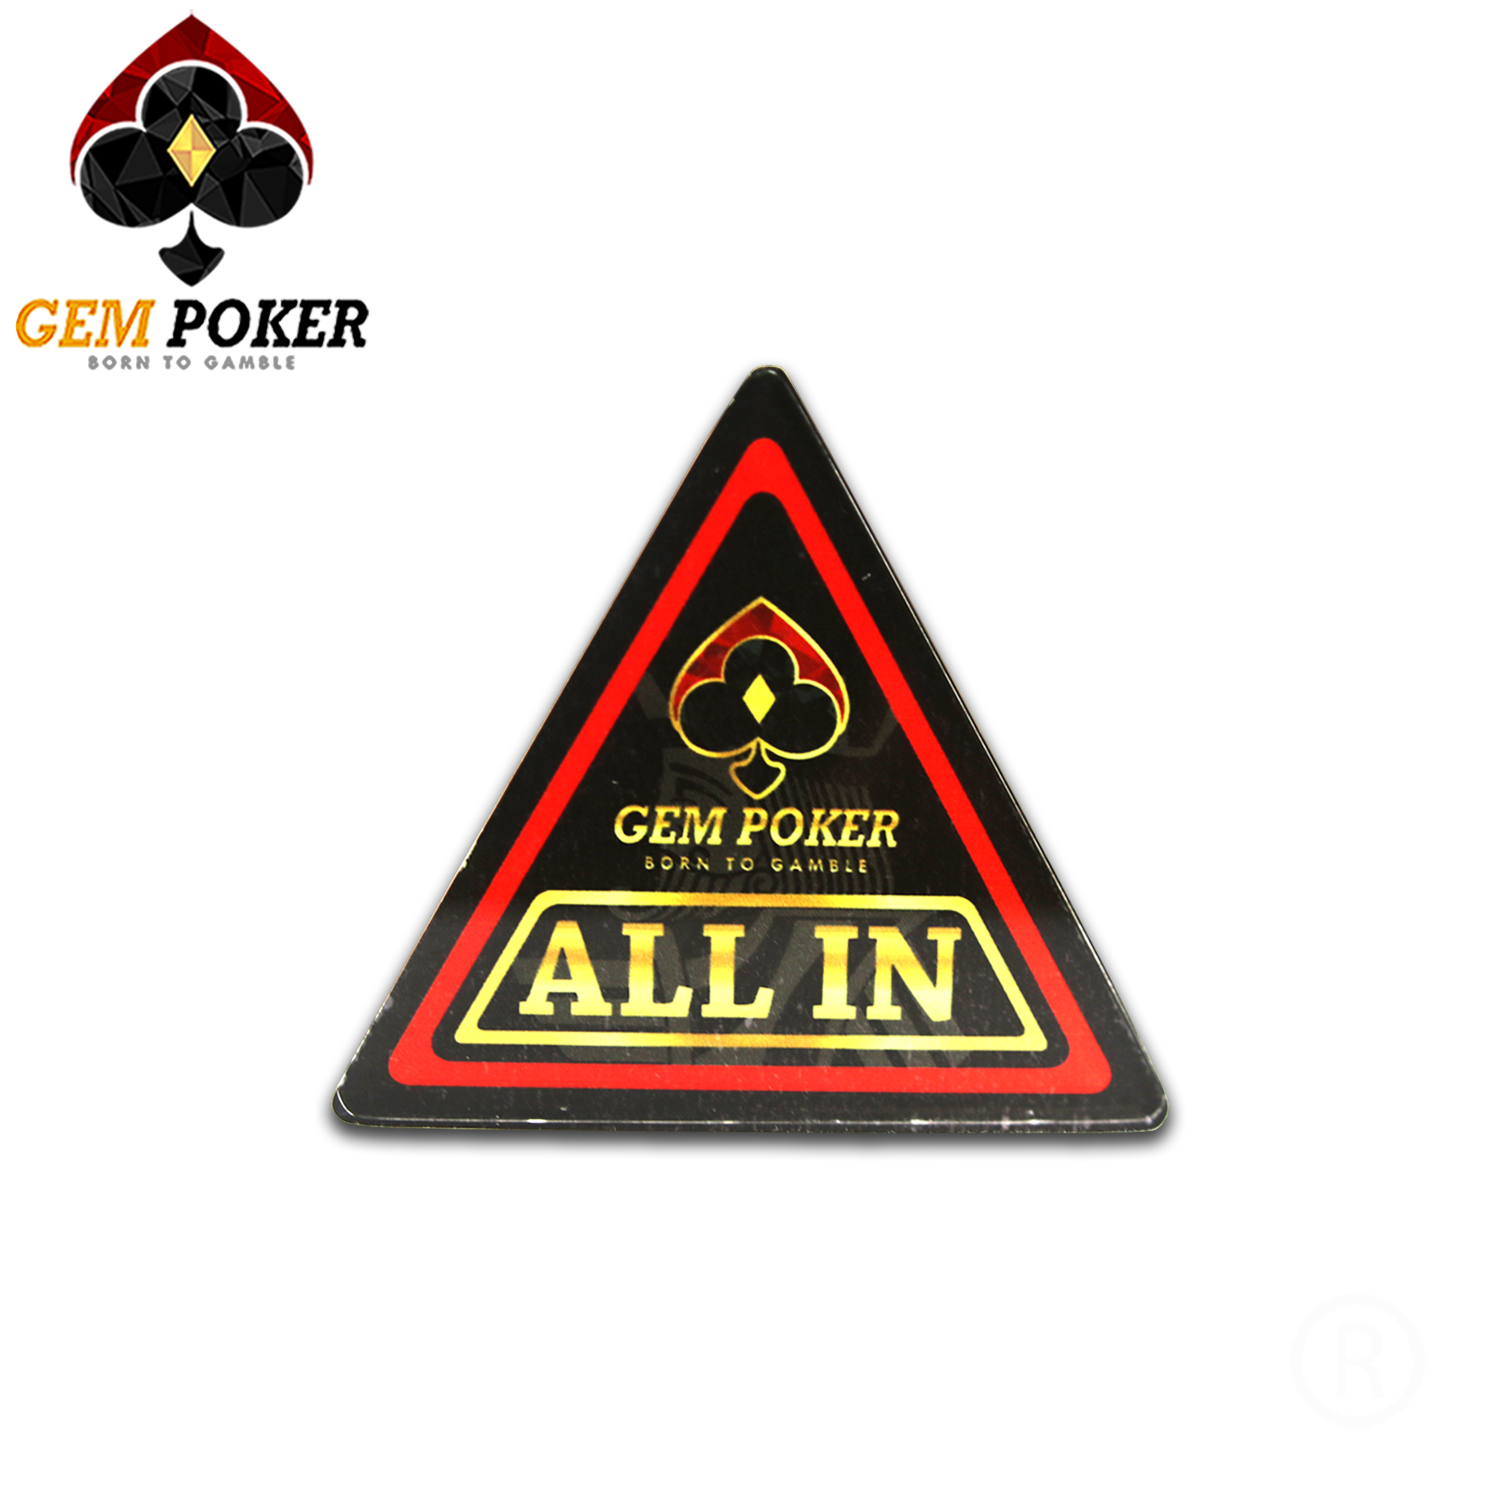 ALL-IN BUTTON GEMPOKER - 02